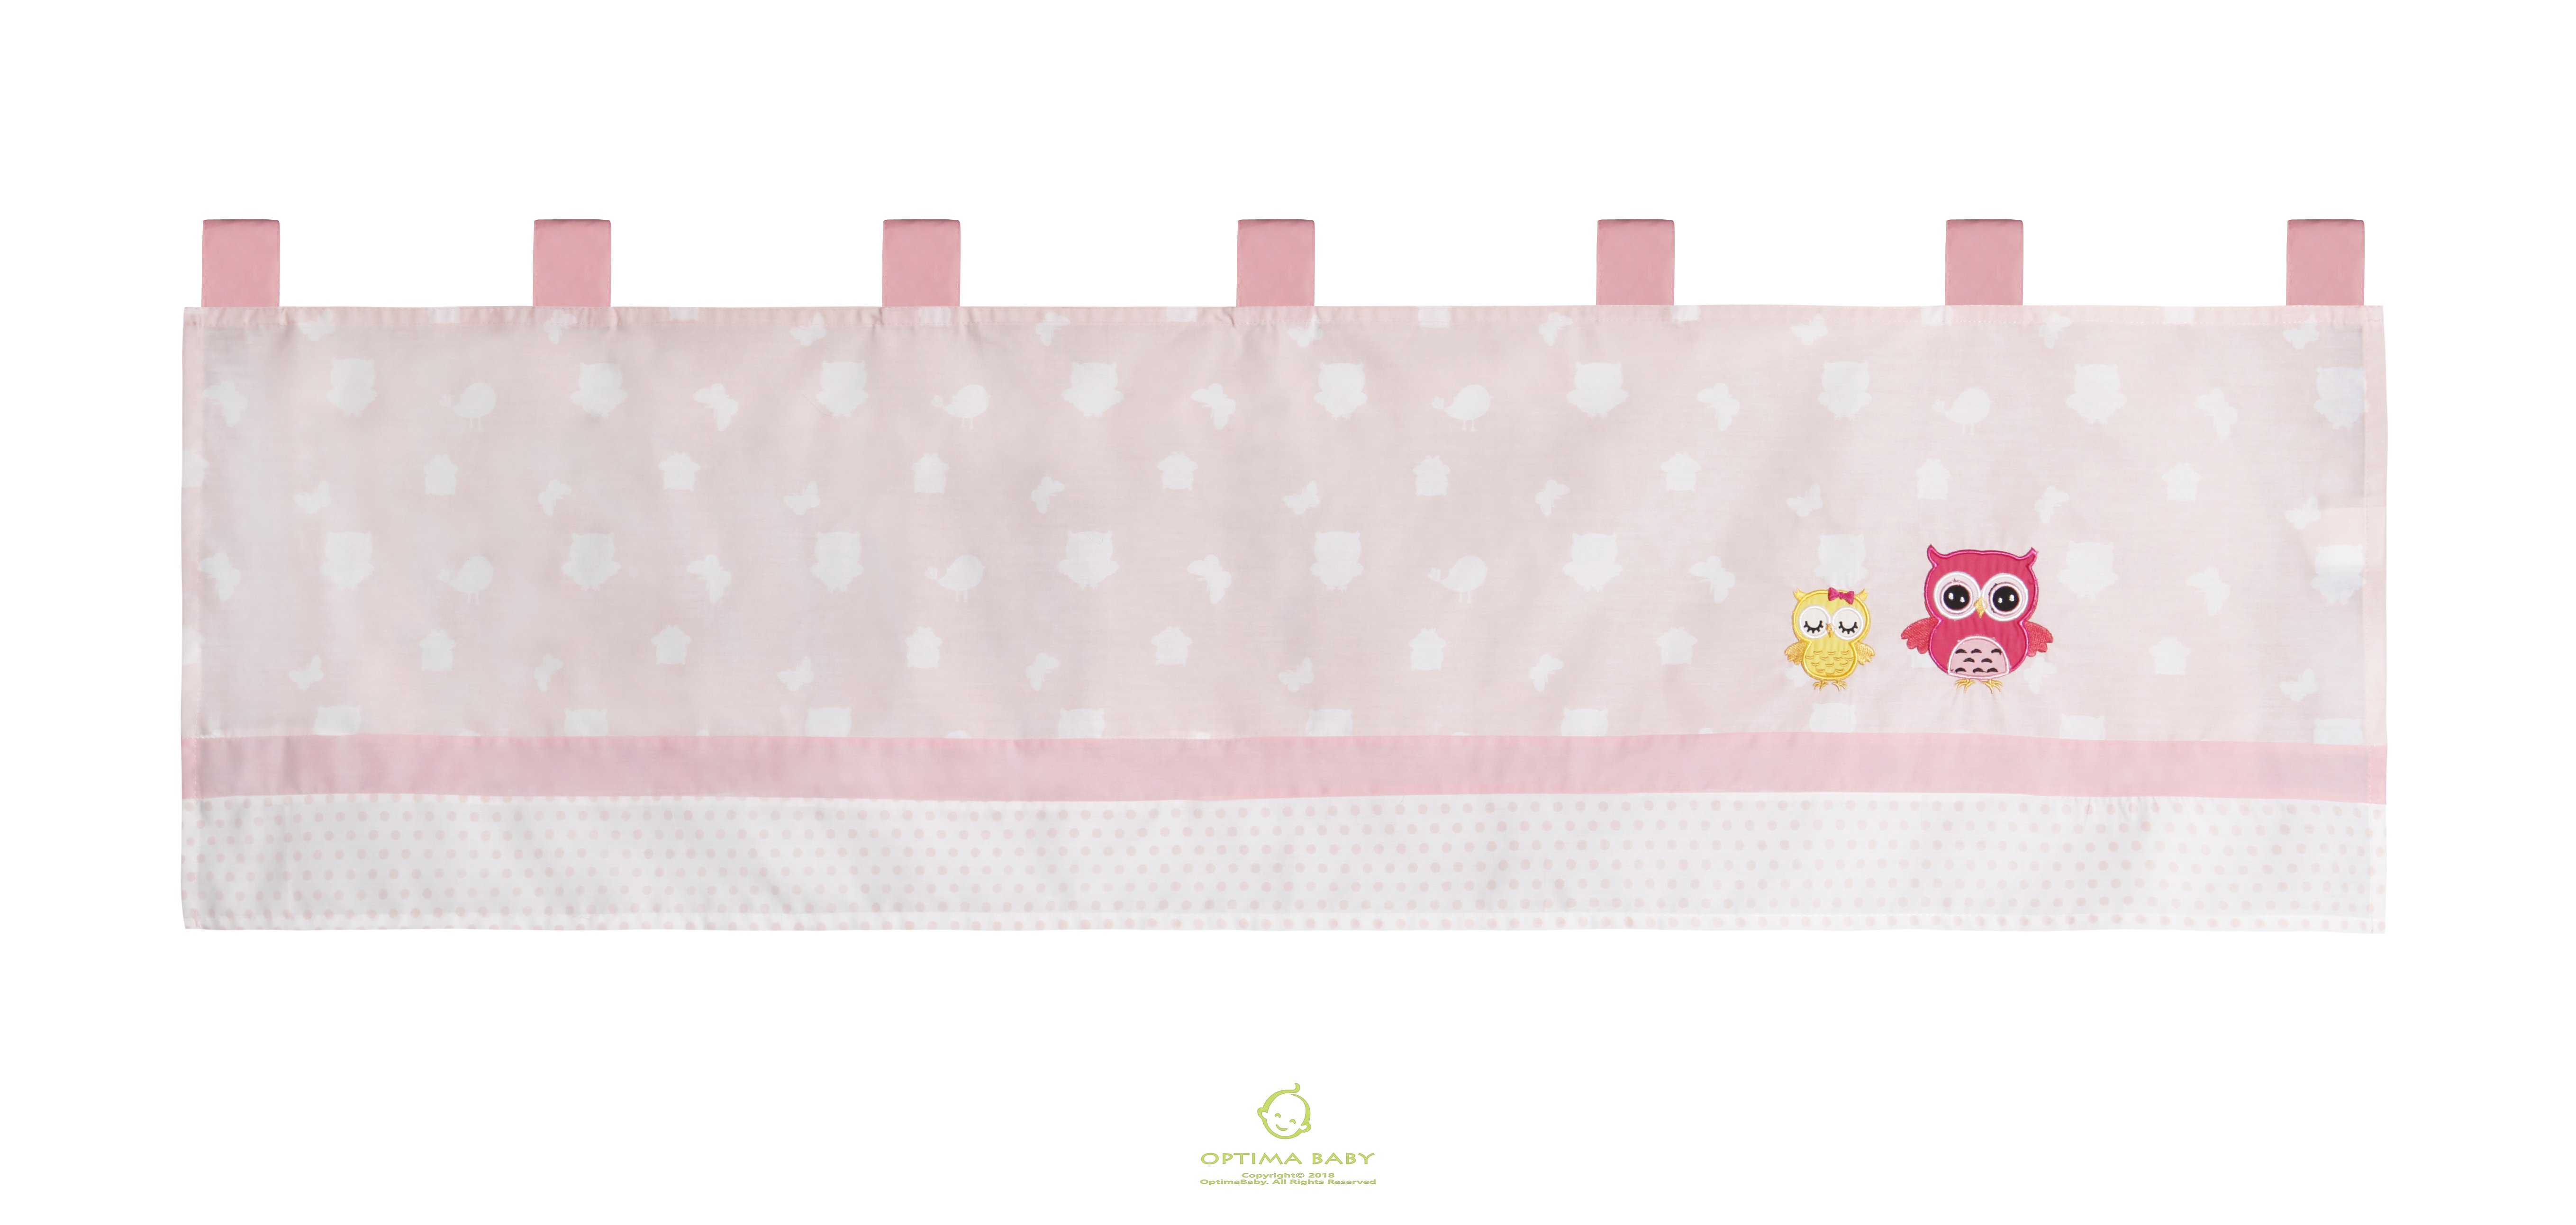 Bumperless 5 pieces Optimababy Owls Baby Bedding Set - image 2 of 4